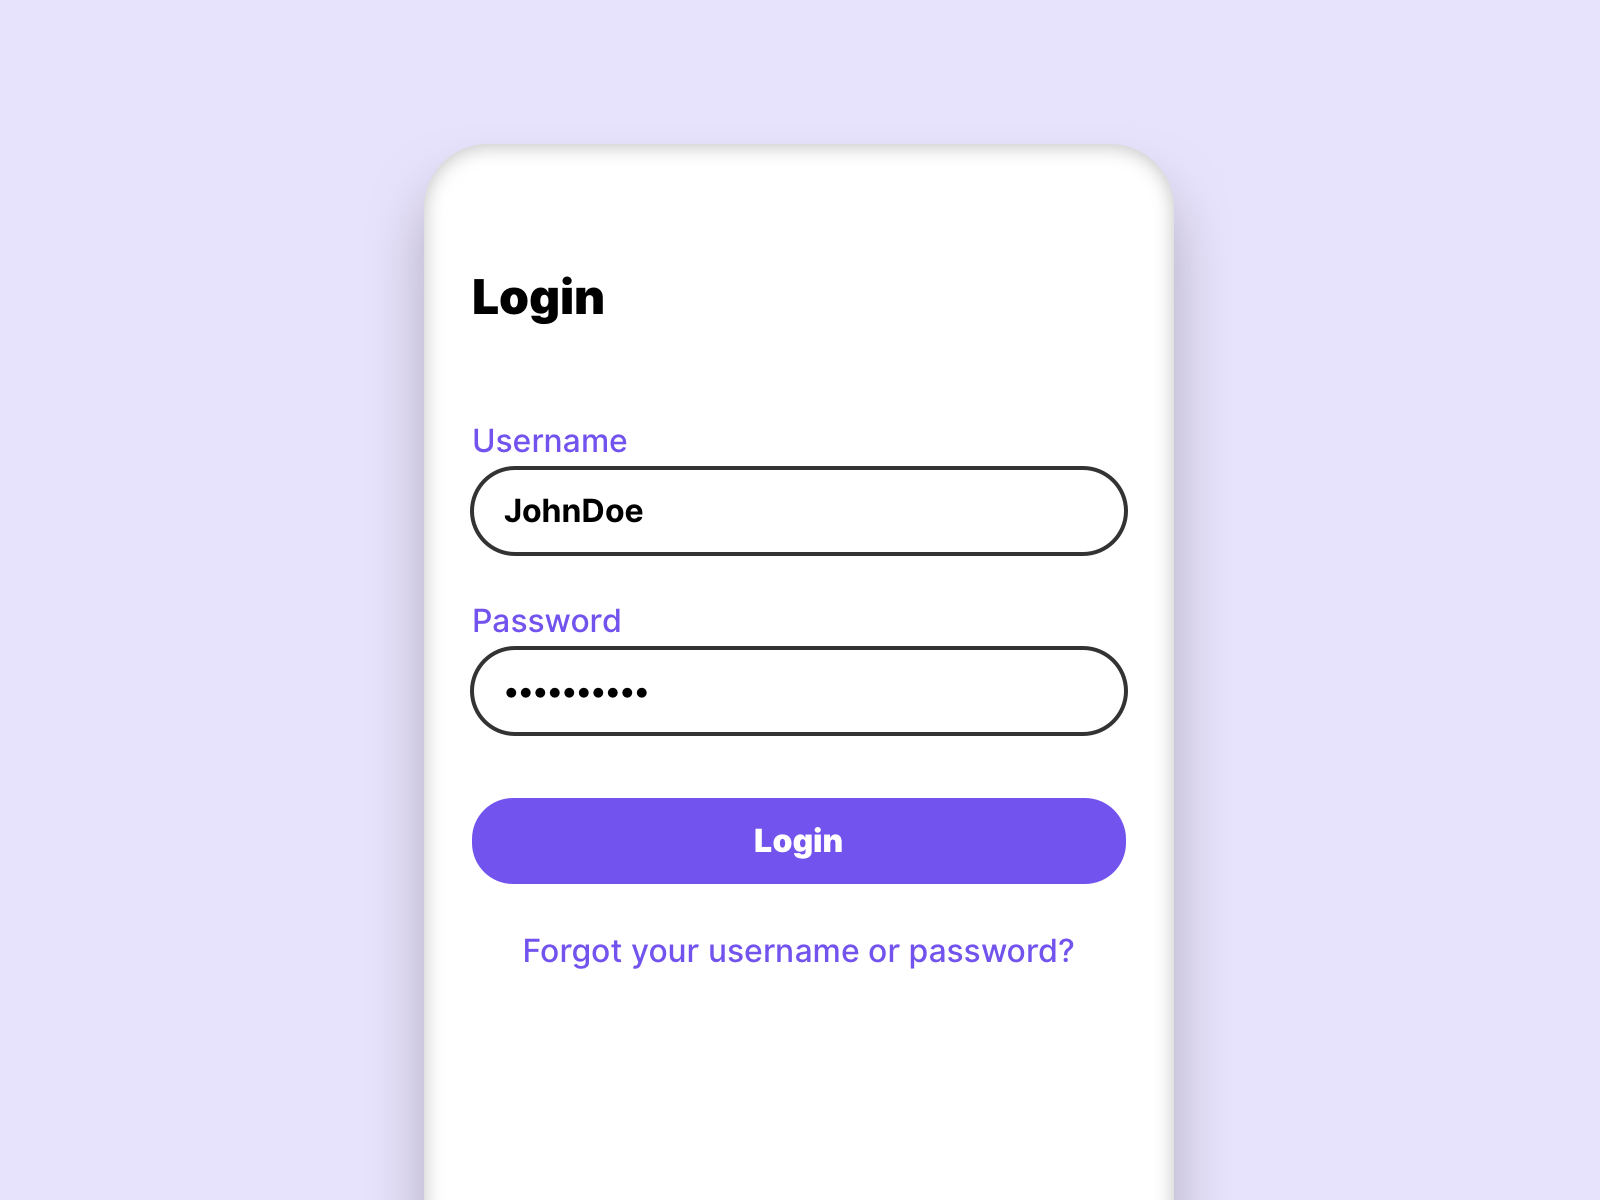 In this picture we see filled in input fields, so the login button is active. 